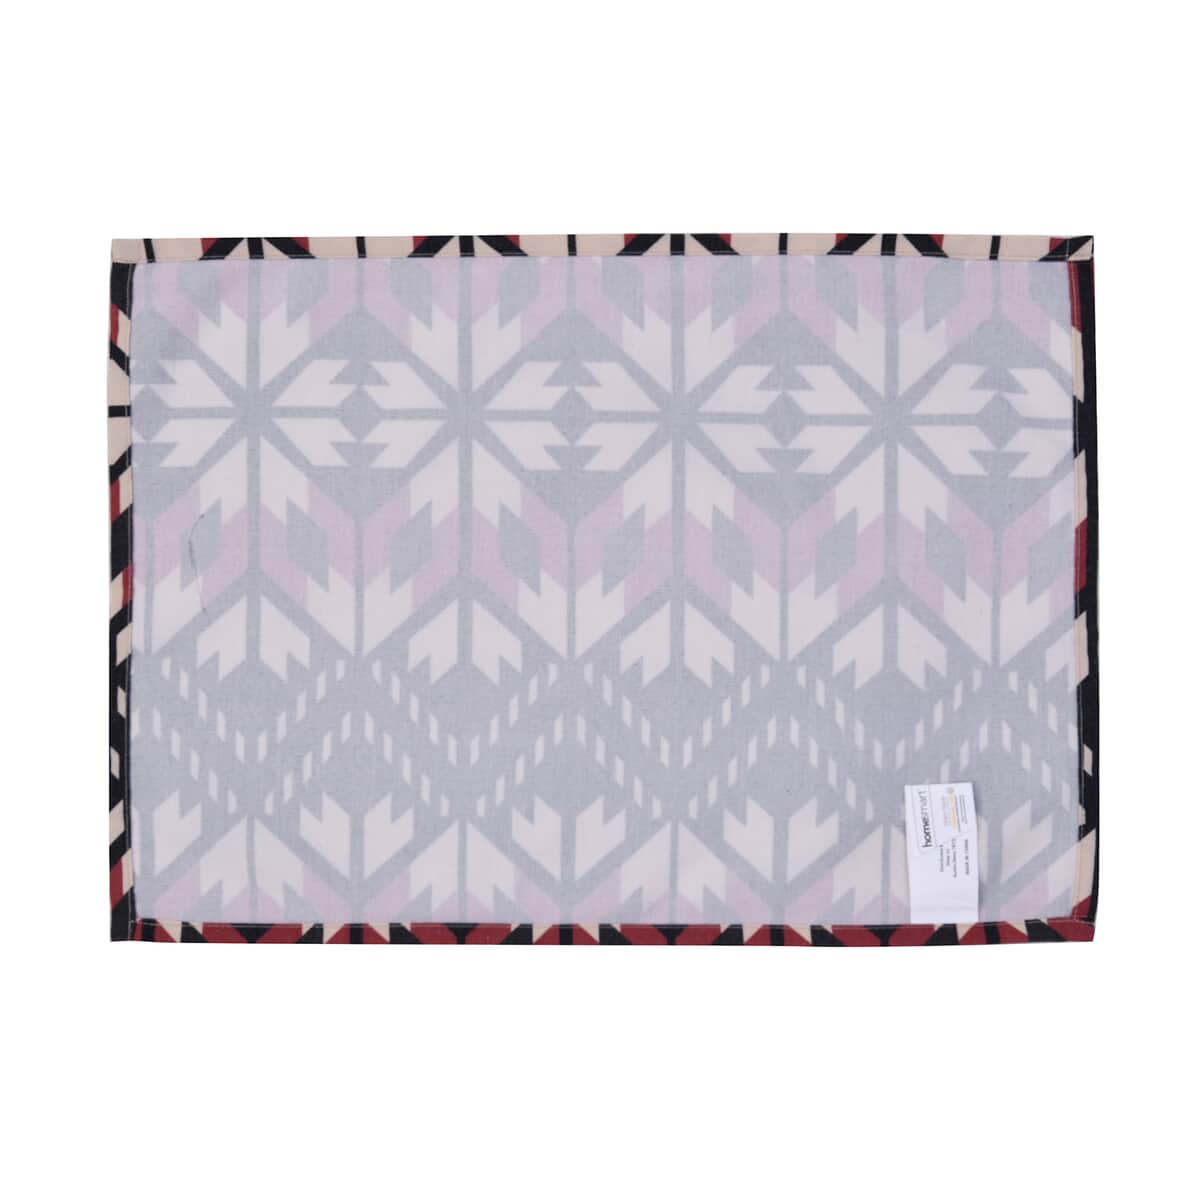 Homesmart Set of 4 Placemats and Table Runner - Geometric Pattern image number 4